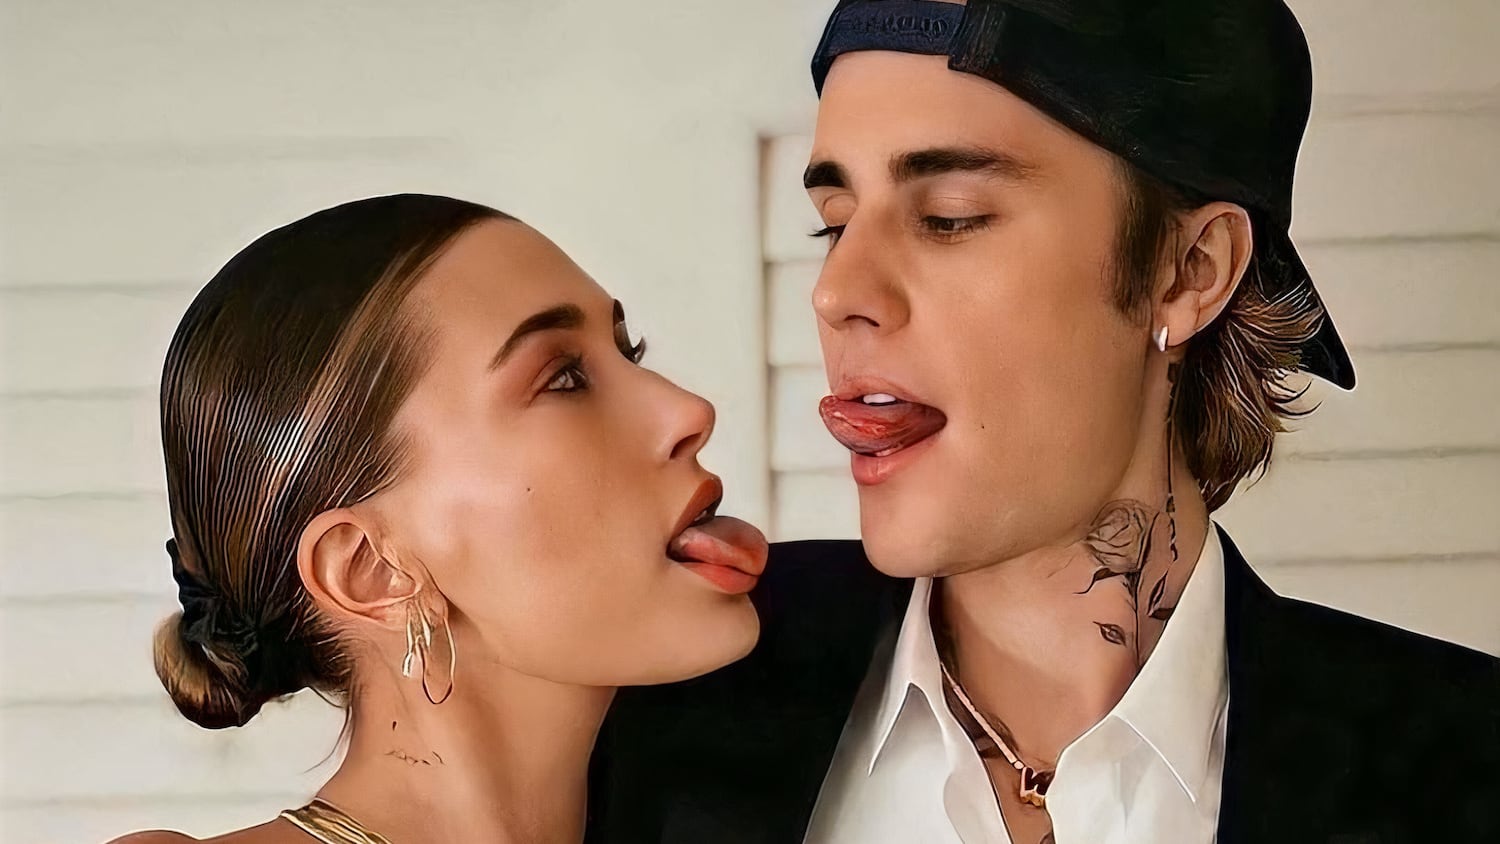 Hailey Bieber Reacts To Rumors Her Marriage To Justin Bieber Is Falling Apart